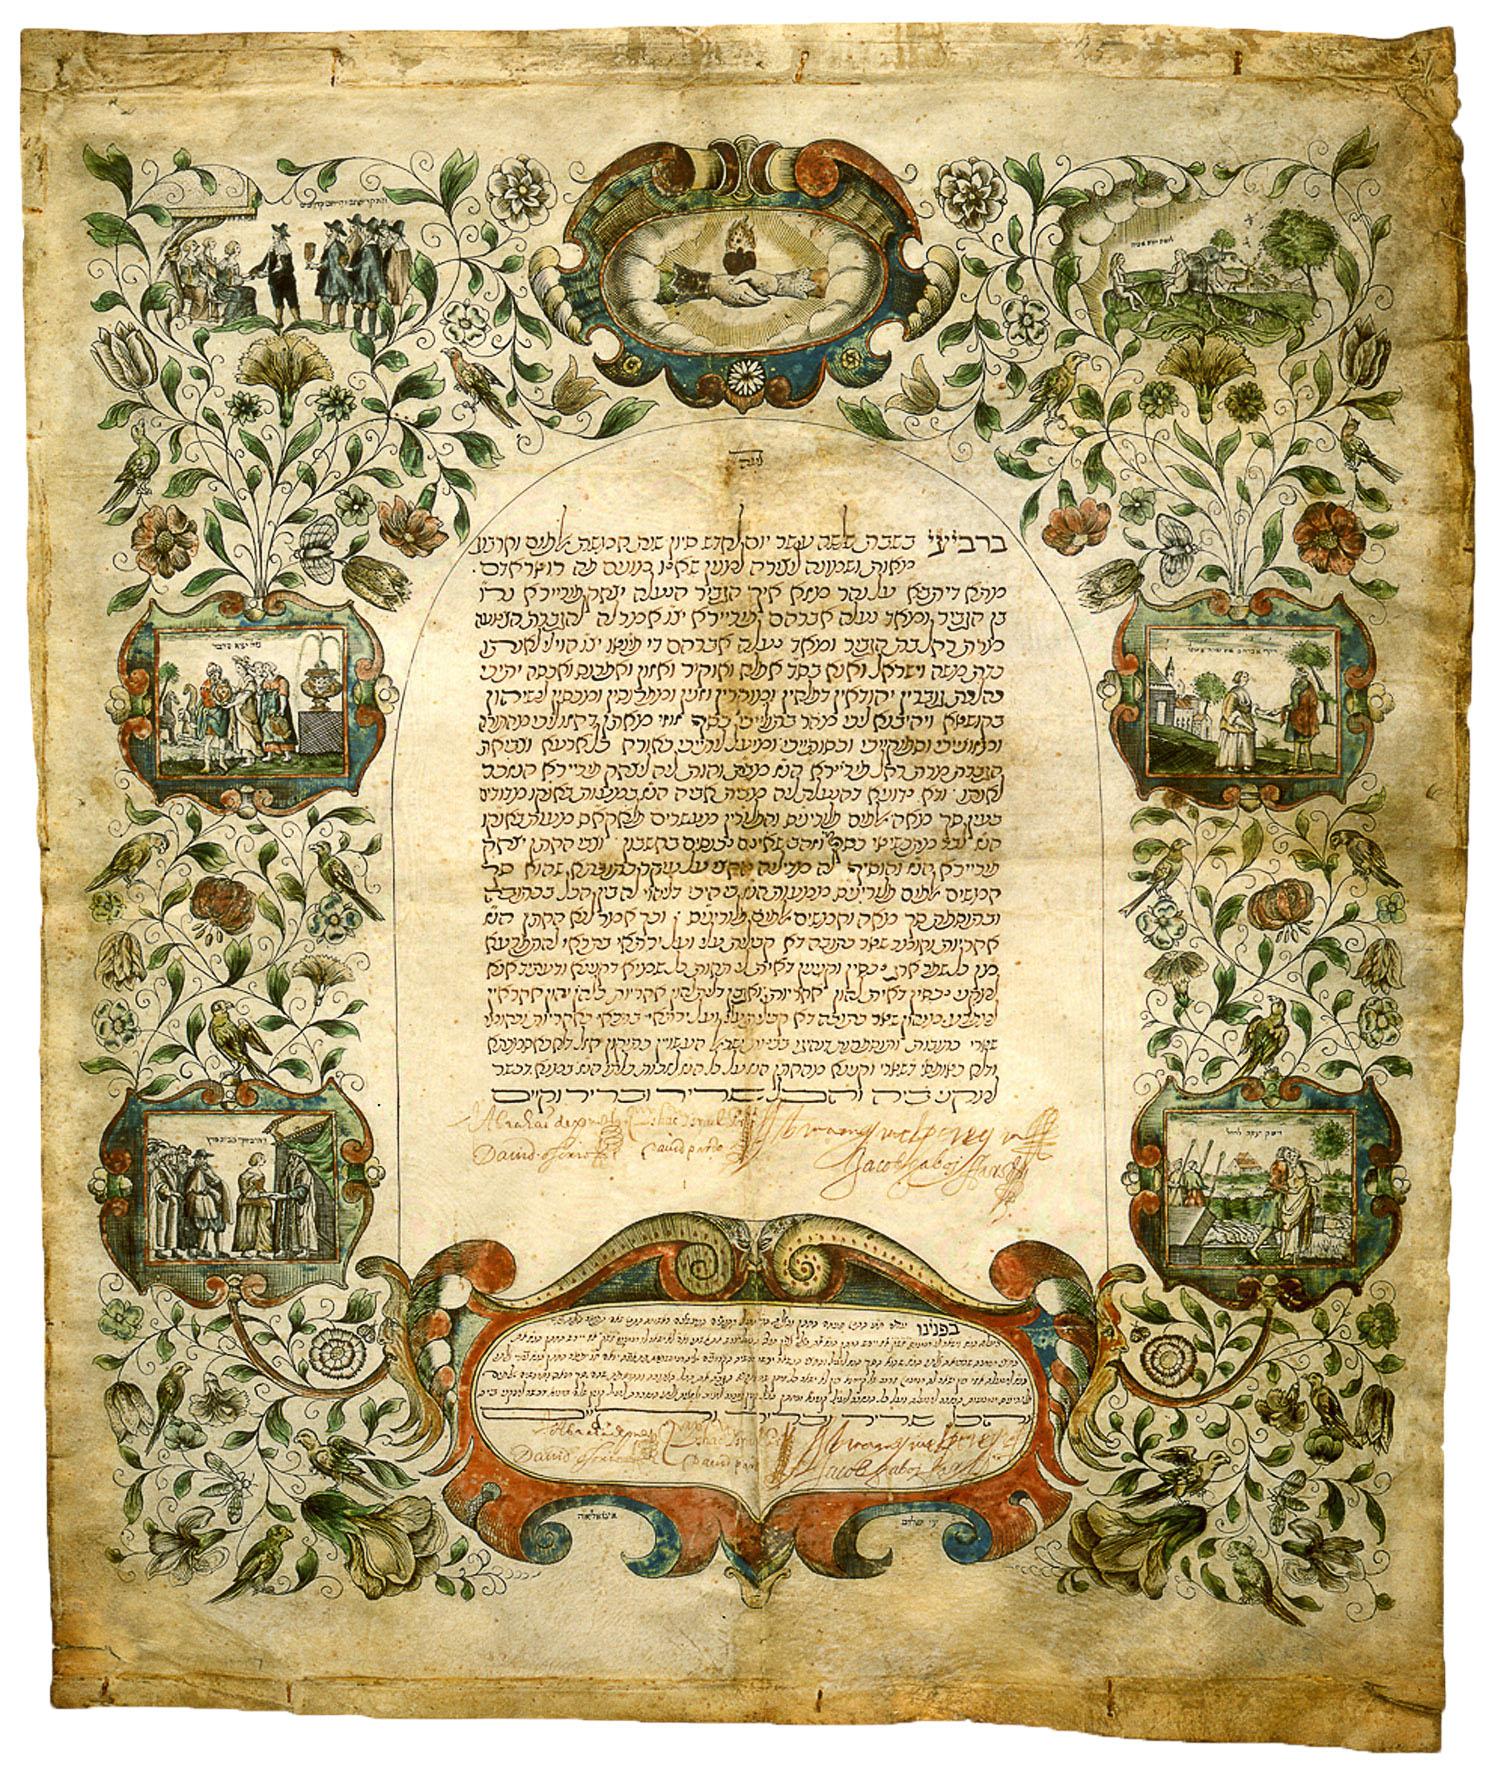 Page of Aramaic text with illustration of pair of hands clasped at top and illustrated vignettes along sides of text depicting wedding scenes, joined by vines and flowers.